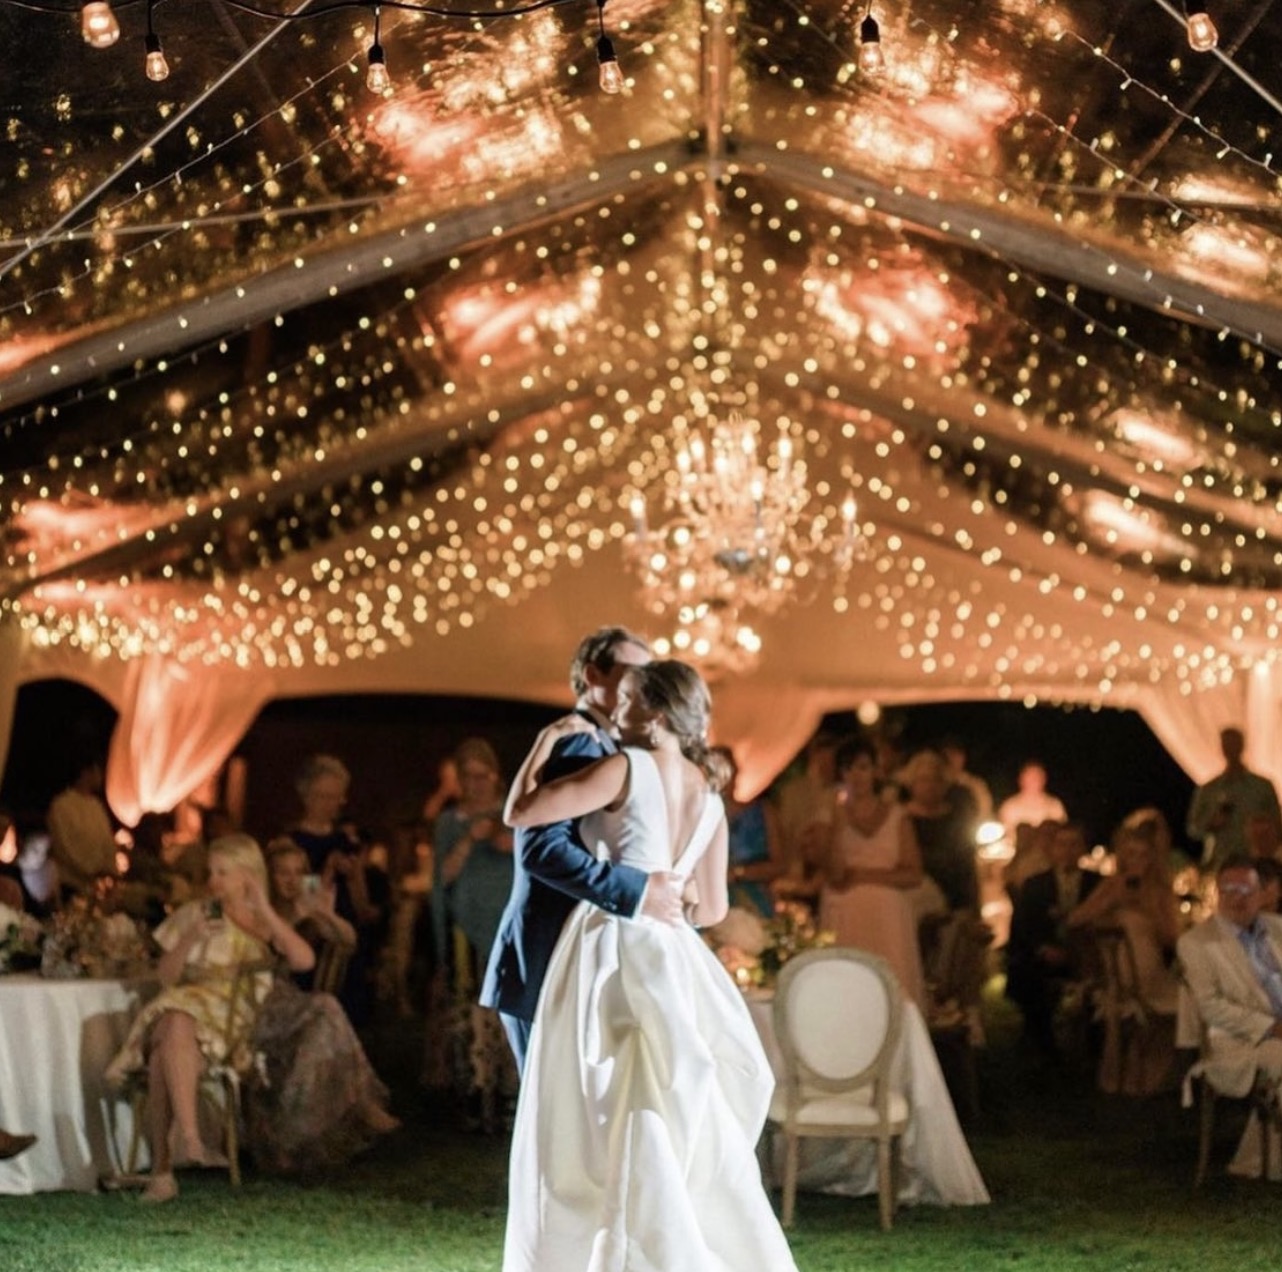 Maui Wedding Rentals make for the perfect event